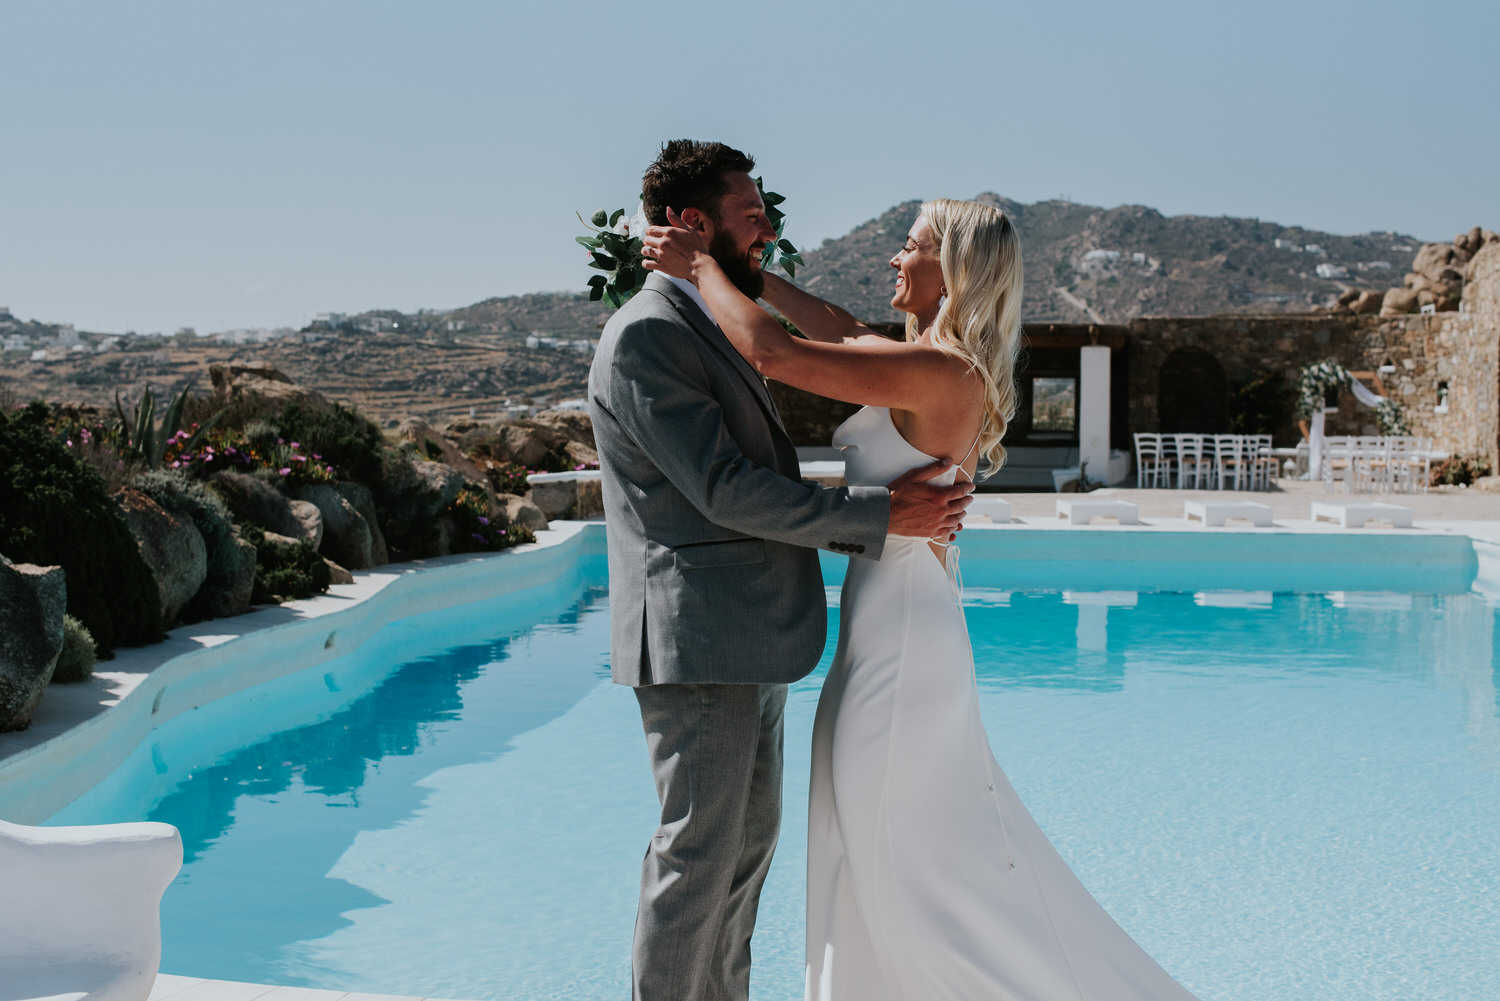 Mykonos wedding photographer: close up of bride reaching out to her groom next to the pool and the rocks in the background.